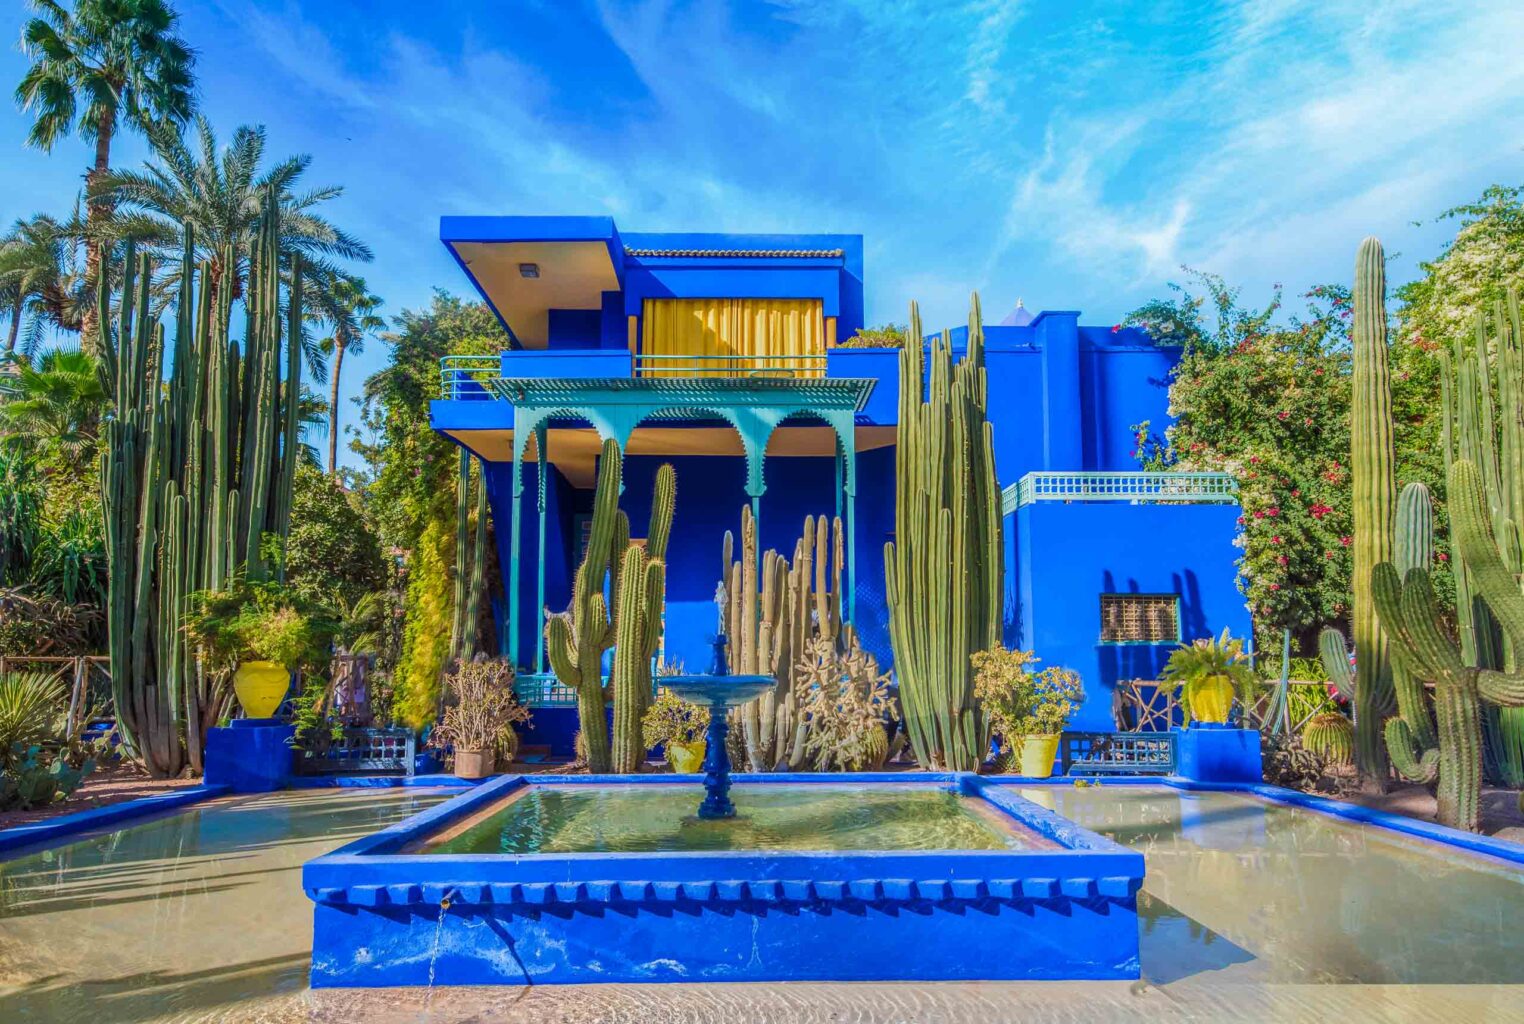 Bright blue architecture and tall, sculptural cactus are stunning in the Majorelle Gardens of Marakkash.